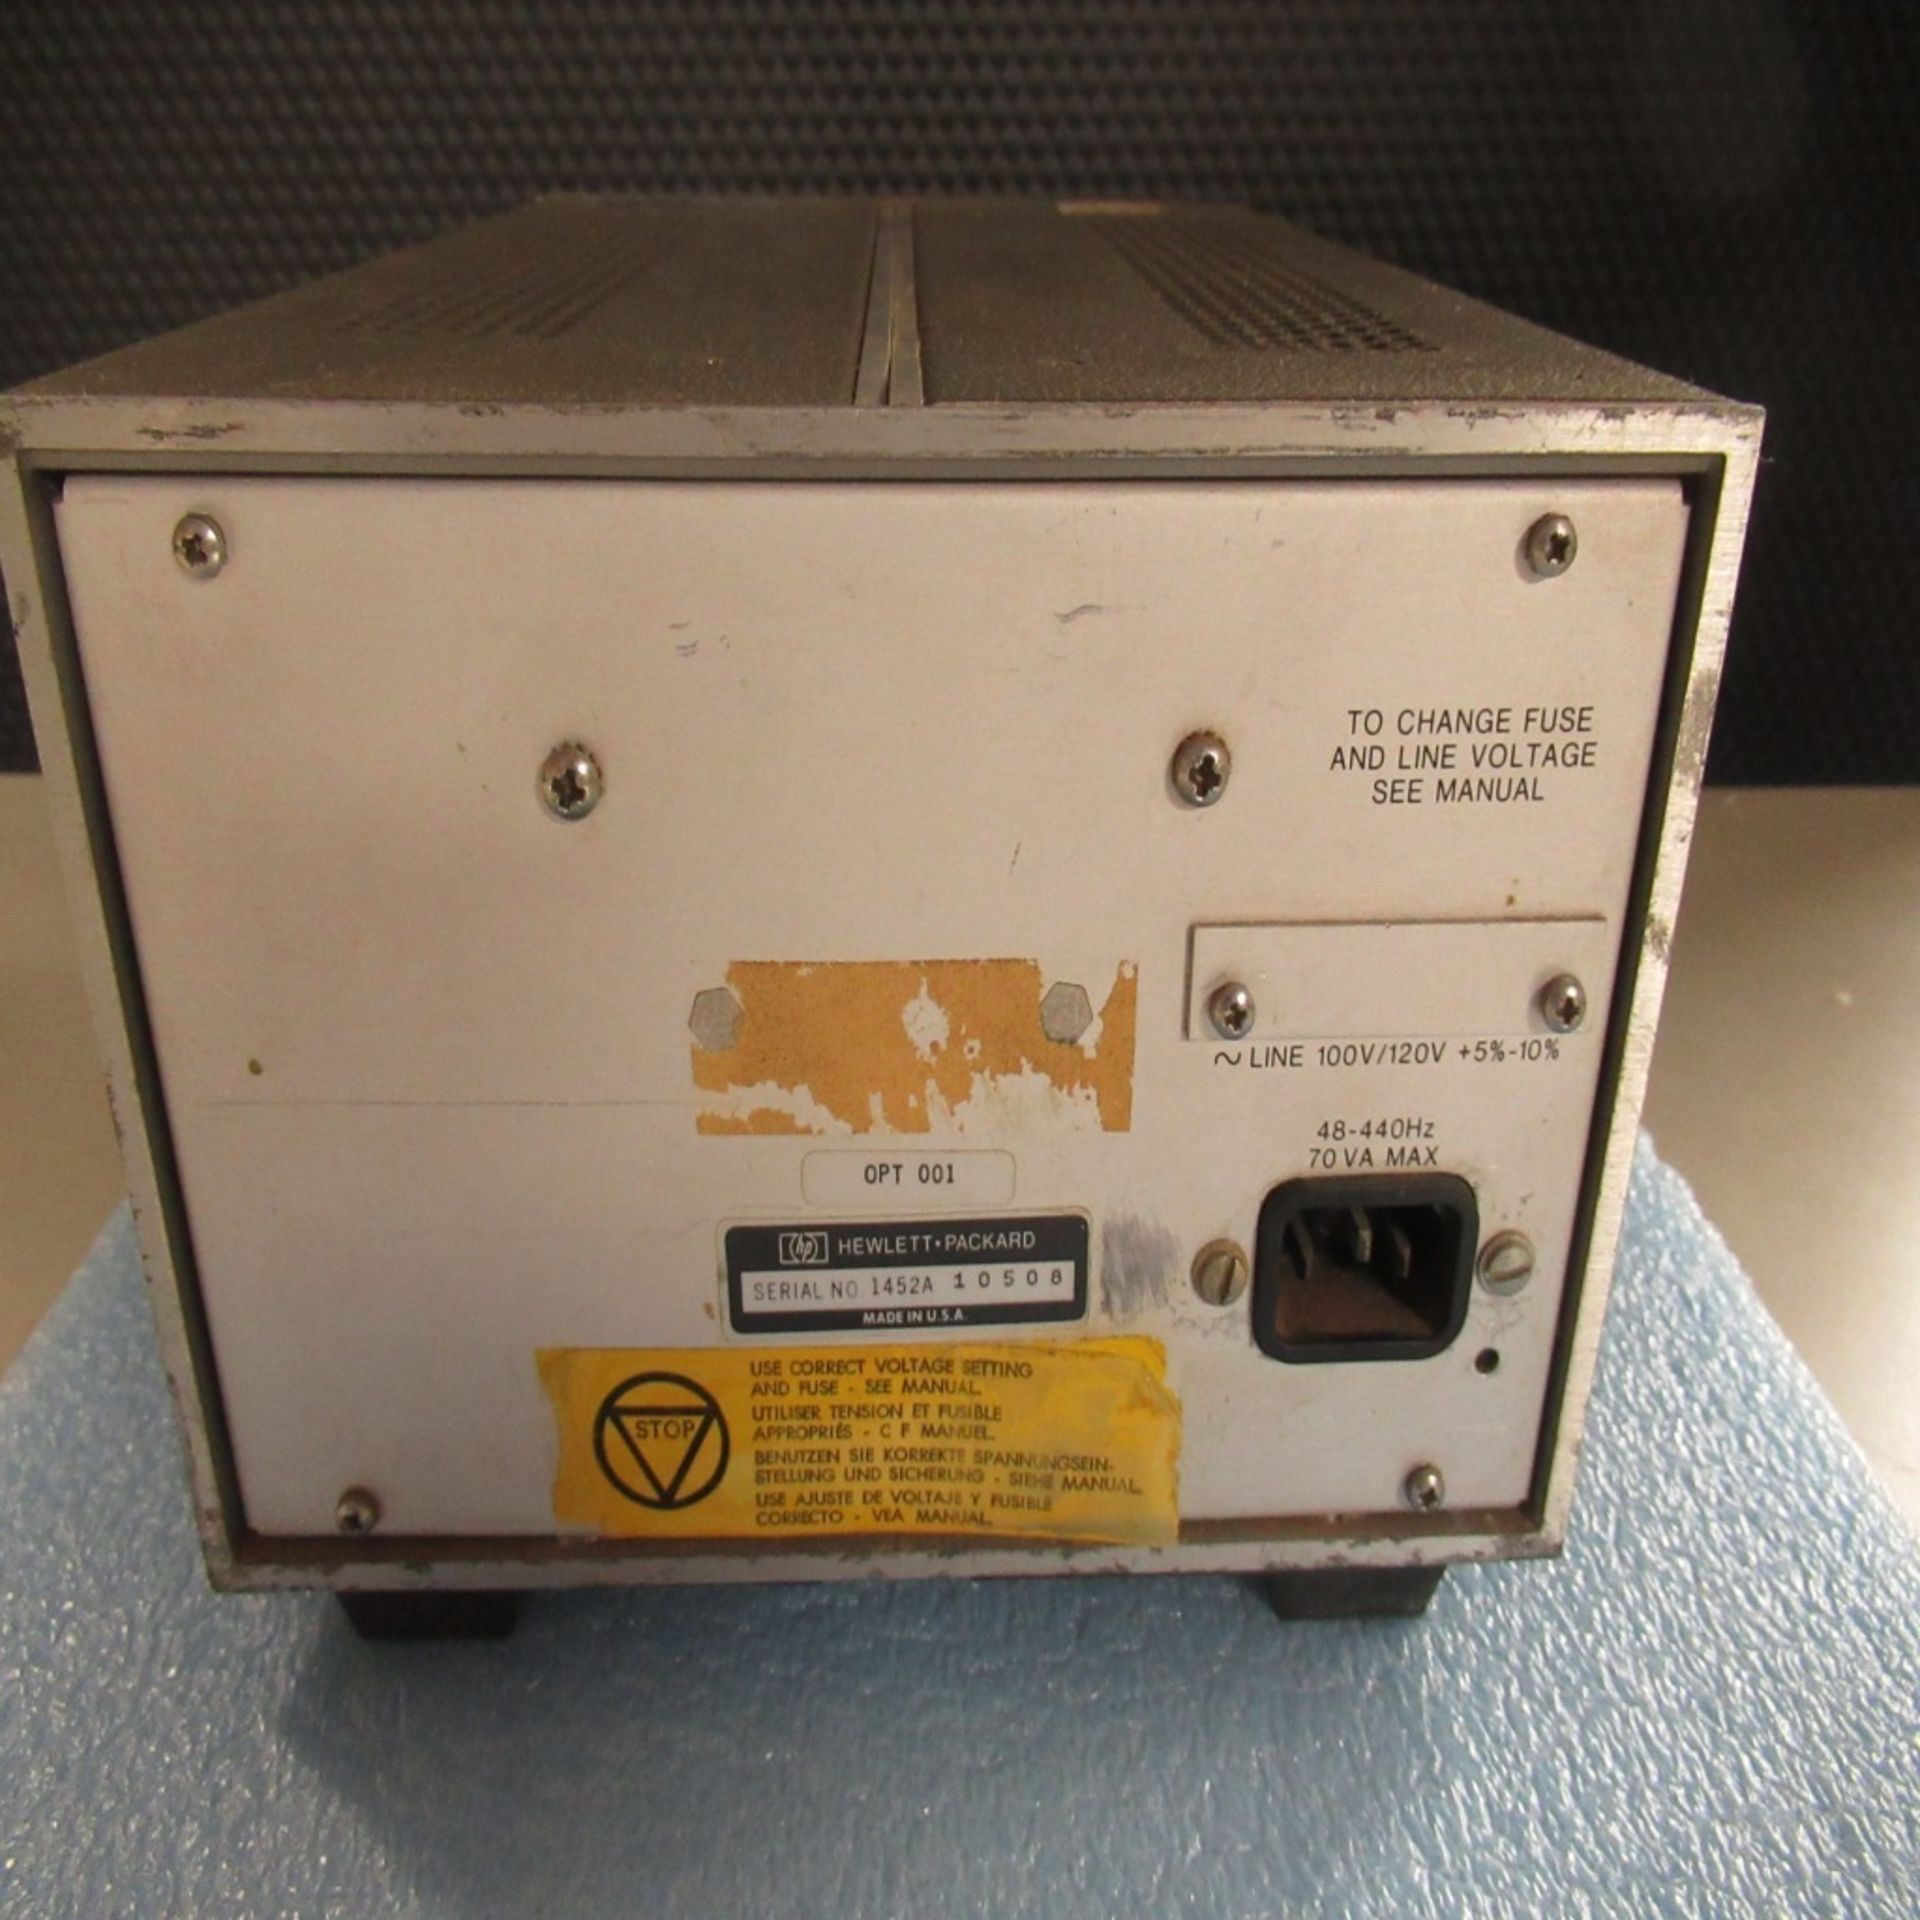 PHOTON SNAP SHOT MODEL 6000 *POWERS ON* NO SCREEN DISPLAY; FARNELL AP20-80 REGULATED POWER SUPPLY * - Image 96 of 222